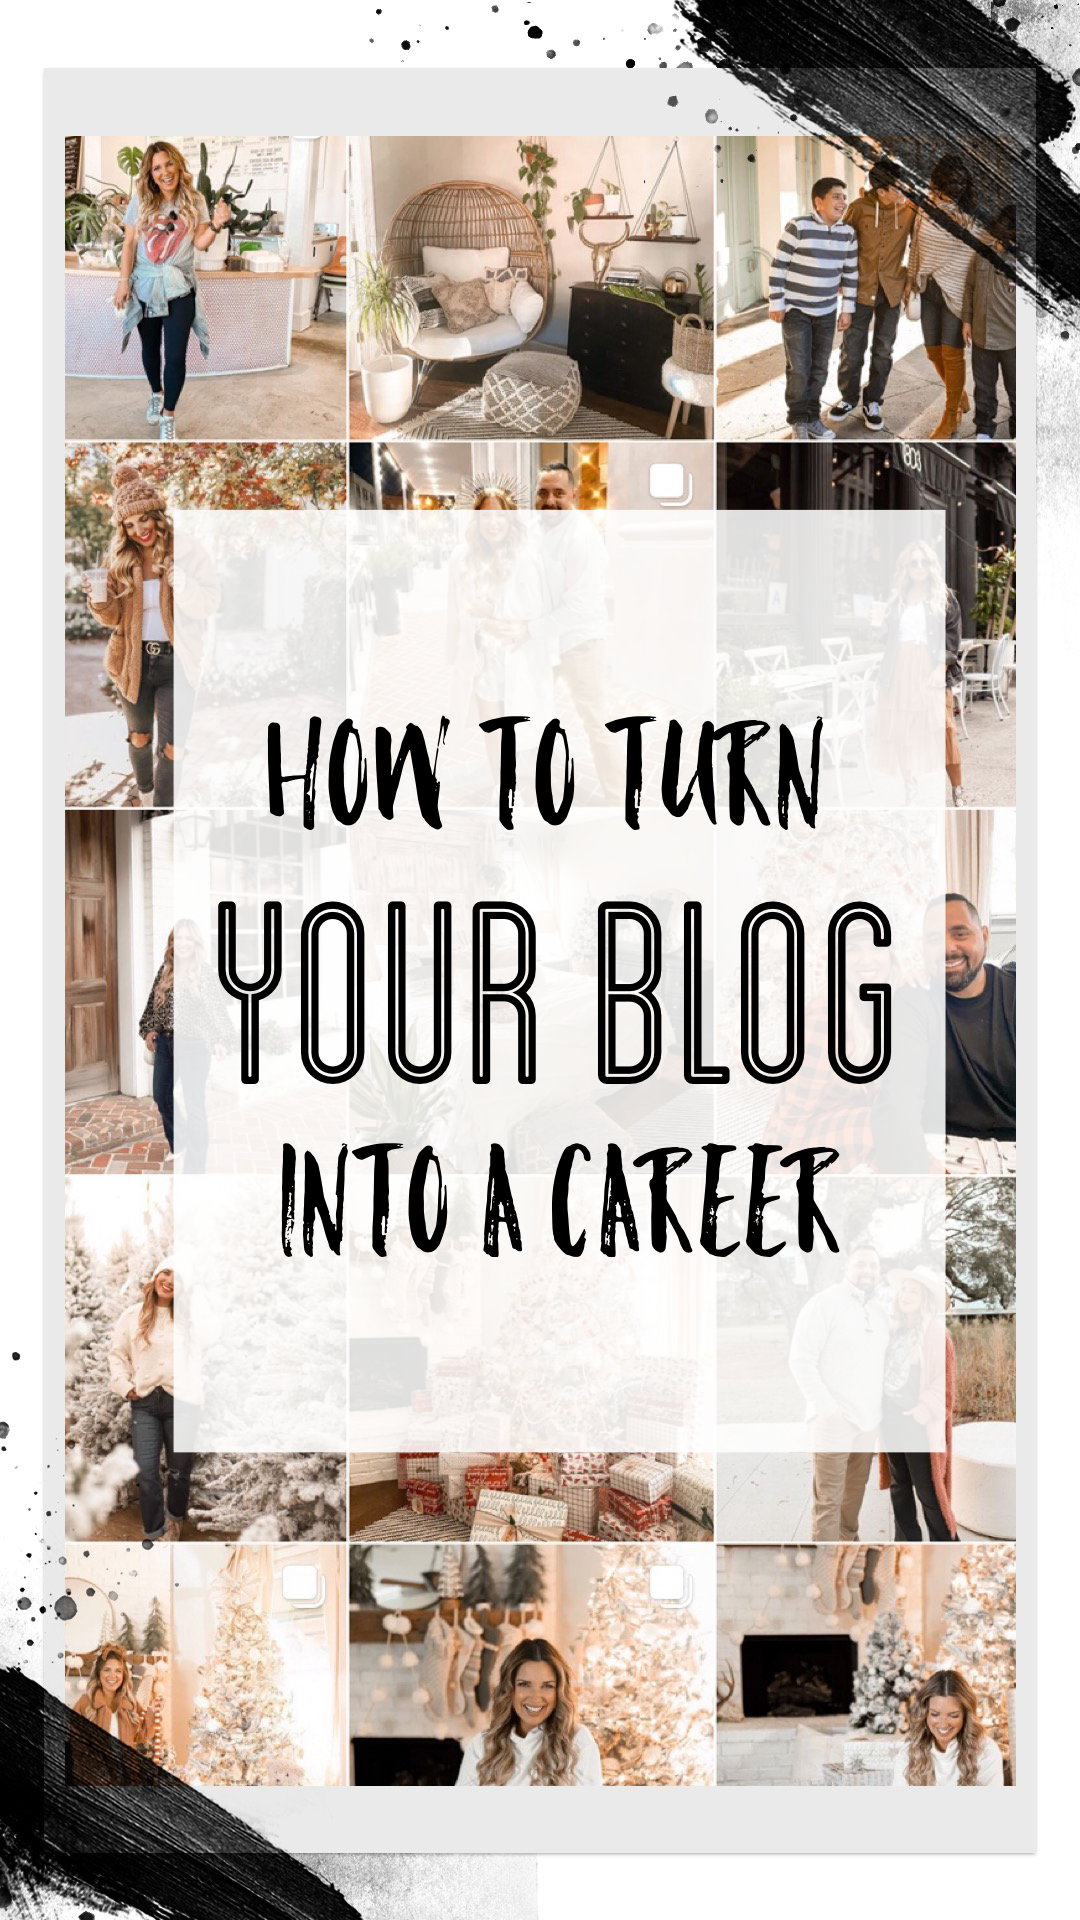 How to turn your blog into a CAREER. How to make money blogging. Sharing all of my tips. #bloggingtips #makemoneyblogging #blogging101 #fulltimeblogging